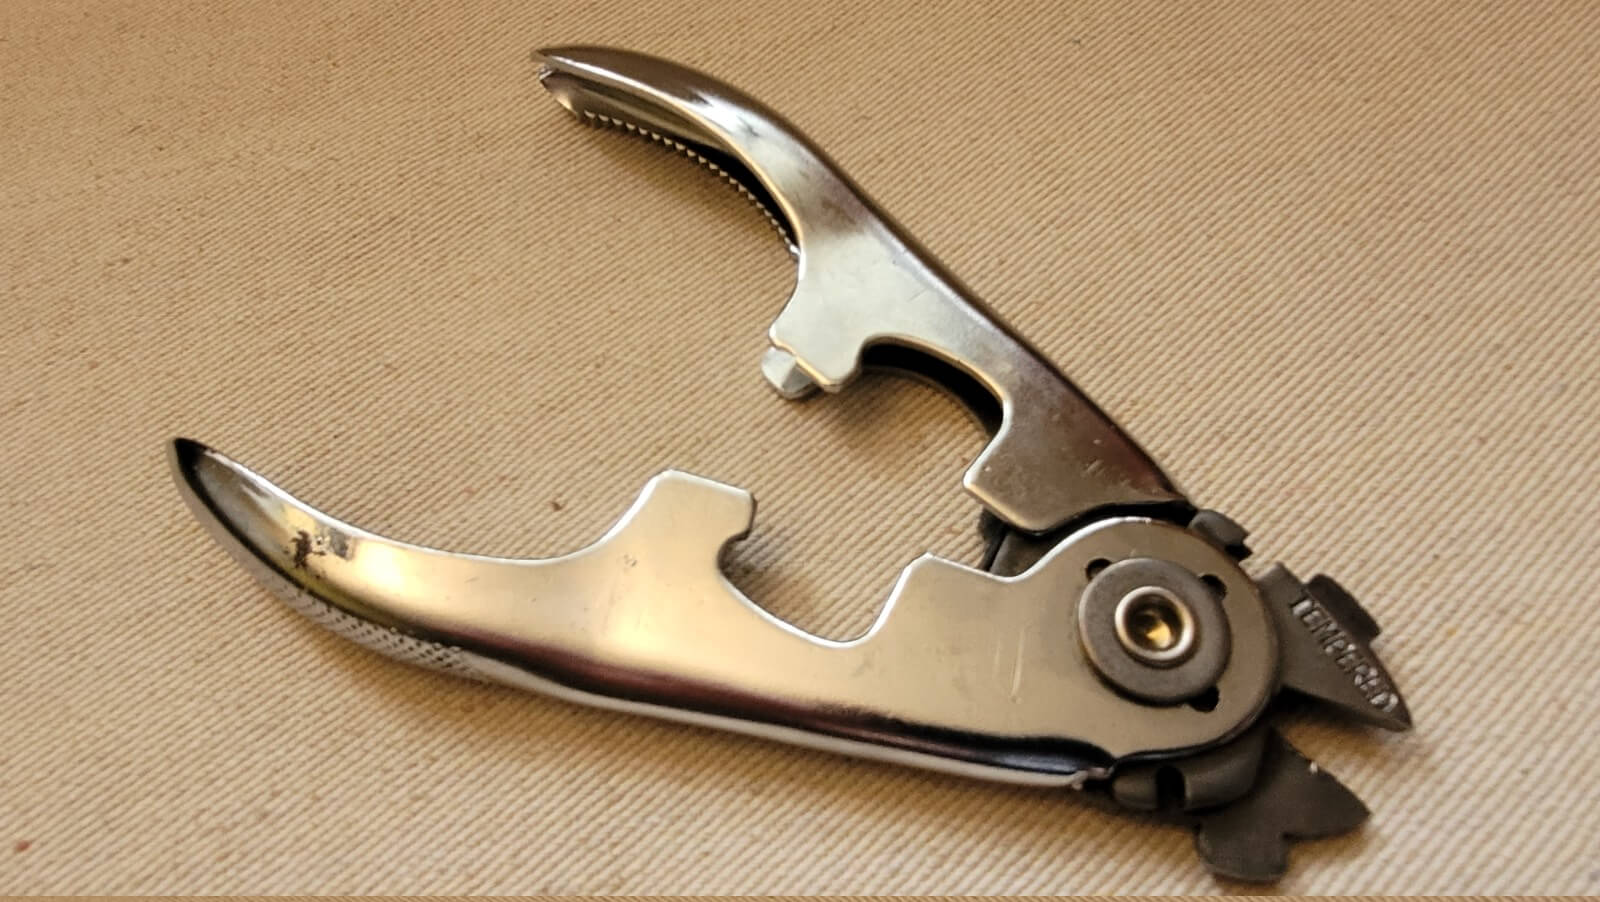 Vintage Master Bottle Opener and Closer Multitool Made in Canada - Rare Collectible Kitchenware and Canadiana Tool with Wire Cutters and Strippers, and Vacuum Jar & Bottle Opener / Closer